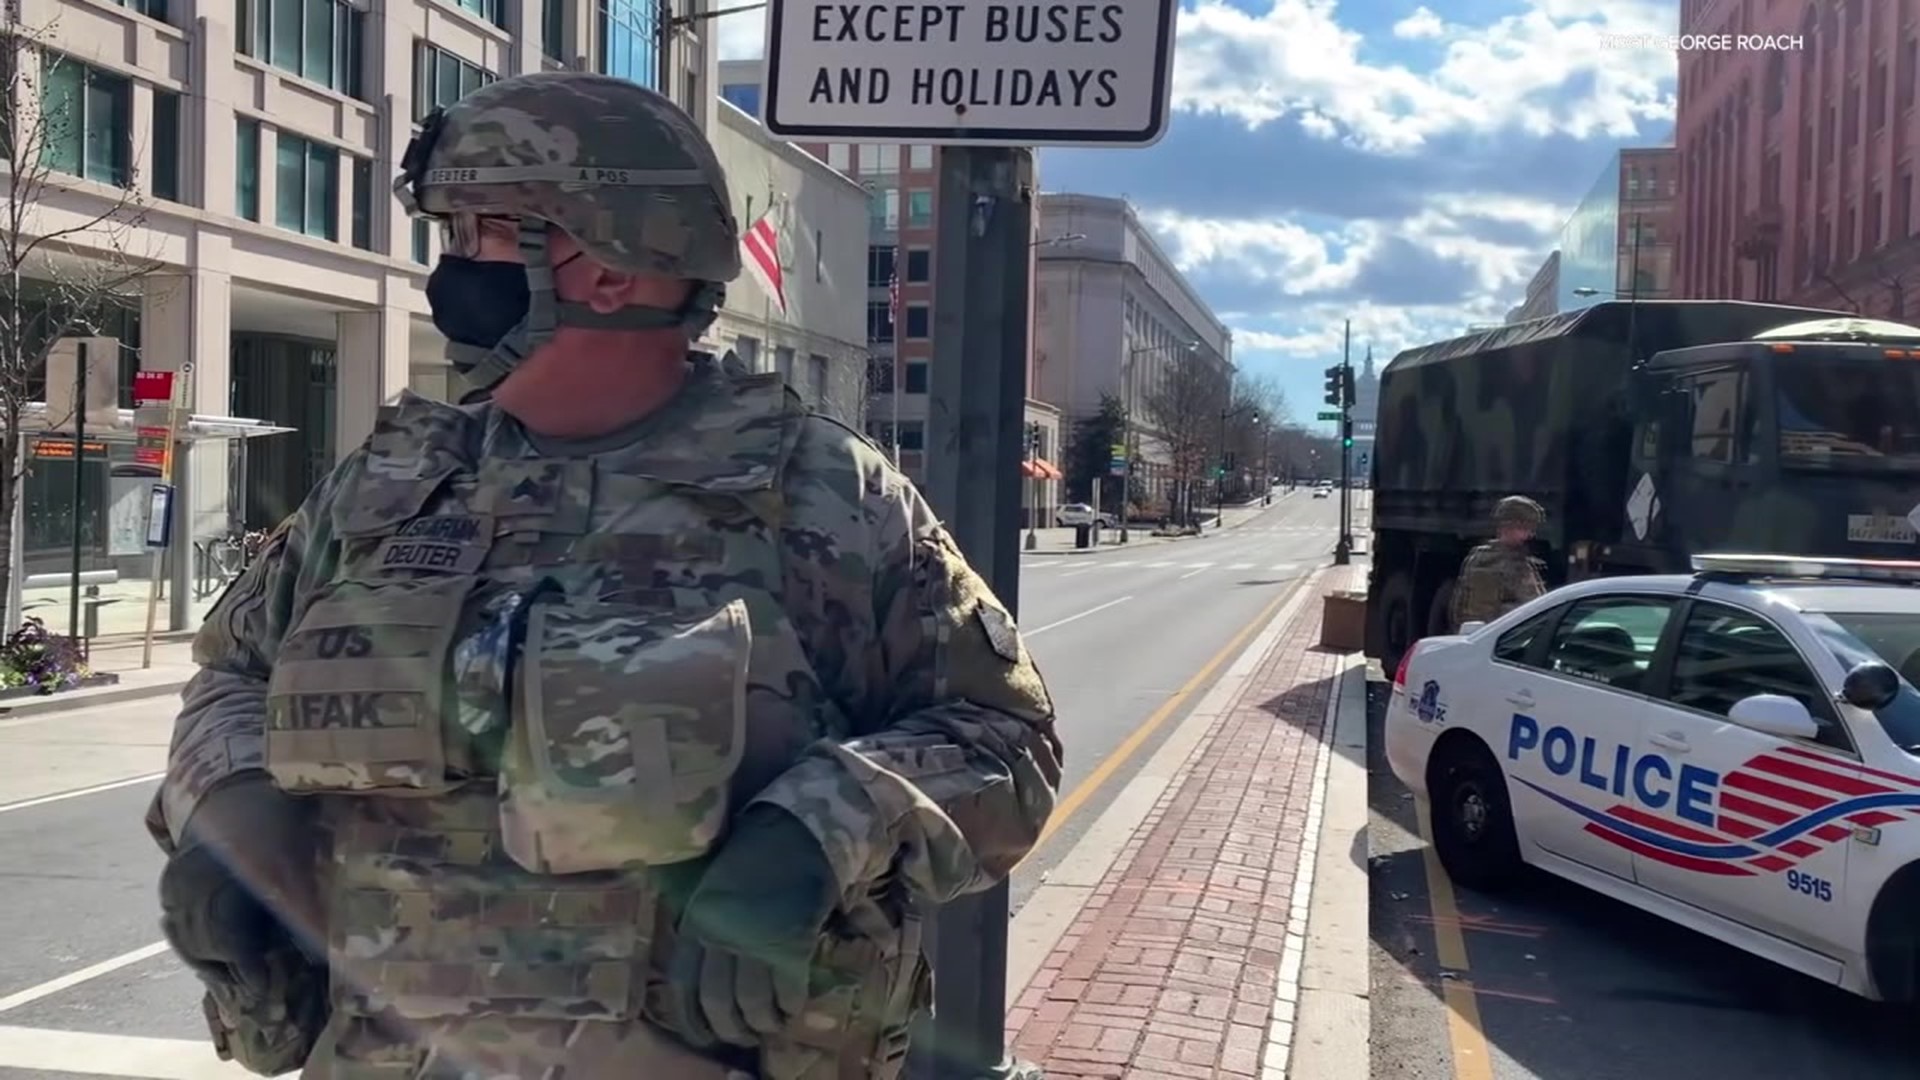 Thousands of Pennsylvania National Guard troops are heading home after a whirlwind time in Washington D.C., including many from our area.